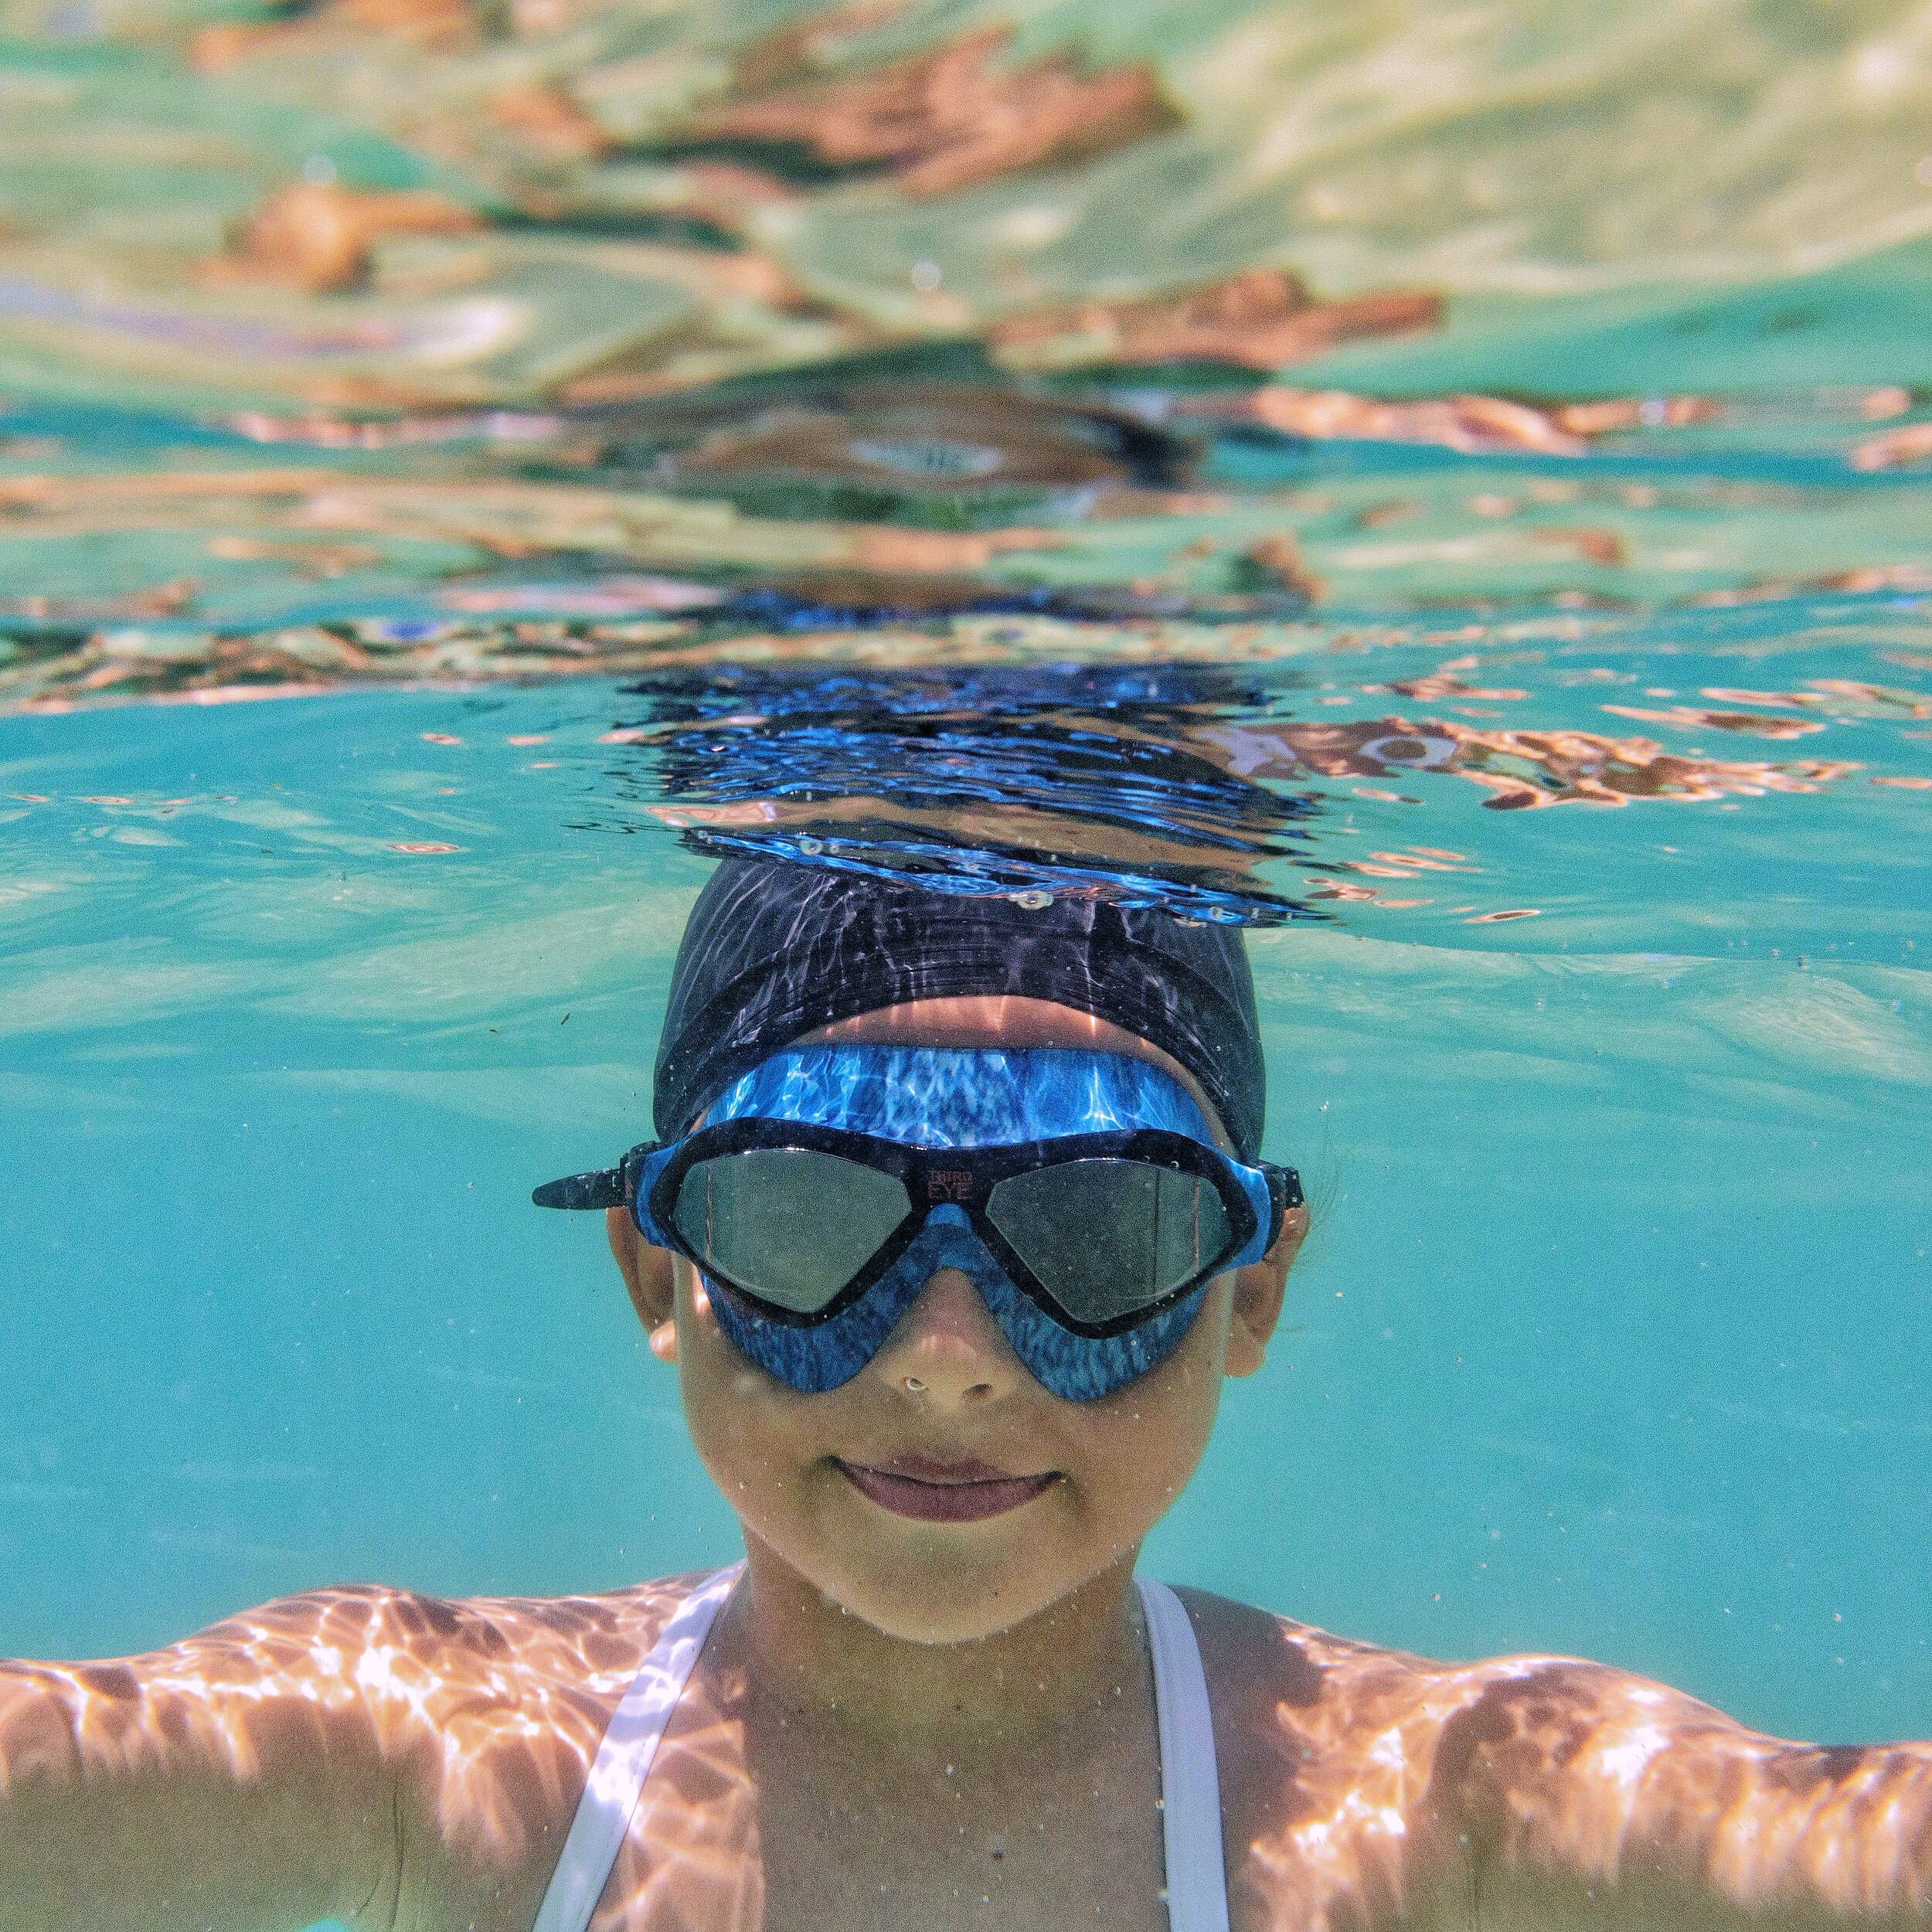 The INITIATE swim goggle, from Third Eye&rsquo;s Gerry Lopez Signature Line. A game changer in the water for kids age 6 to 10. 

📷 Jeff Hornbaker @jeffthirdeye

Available in black, grey camo or blue camo. Online at thirdeyeworld.com, get 10% off you